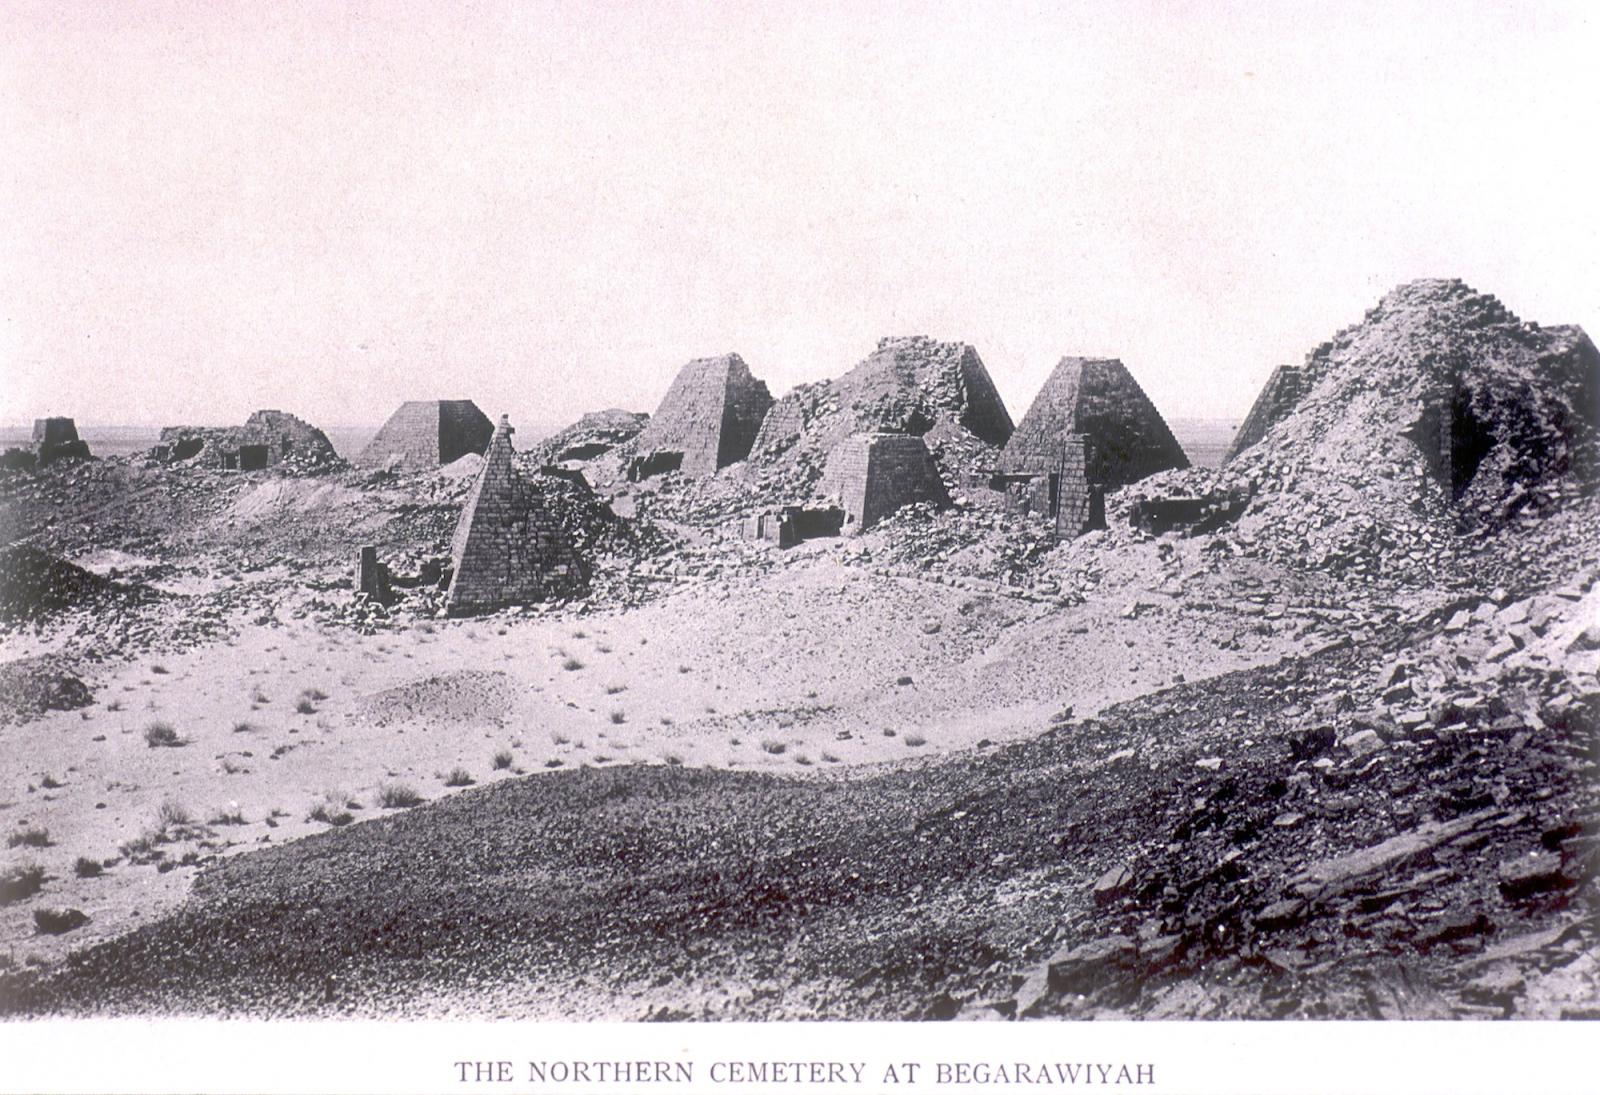 Pyramids from Begrawiyah Northern Cemetery, Meroe, Sudan, dating between 270 B.C and A.D. 350.